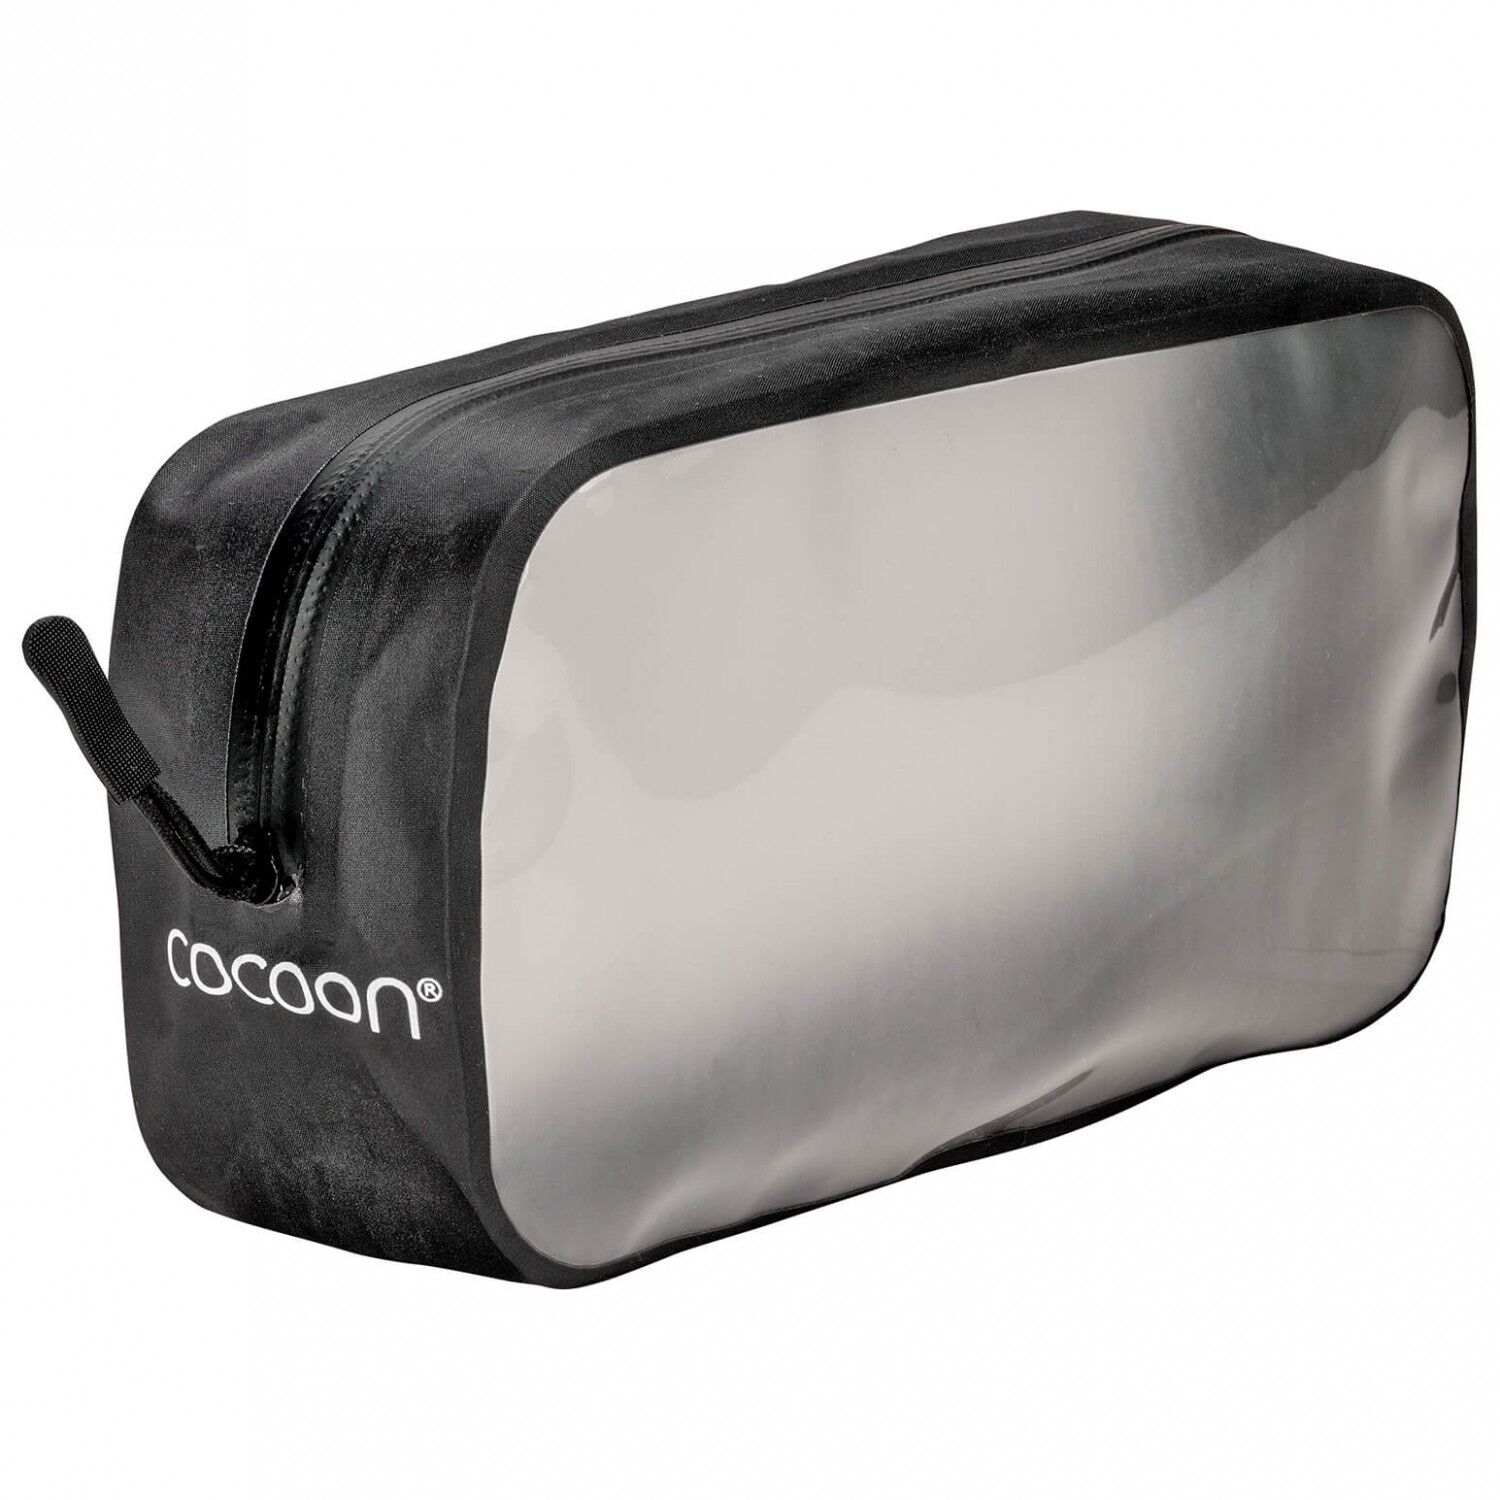 Cocoon Carry On Liquids Bags - Matkapussi